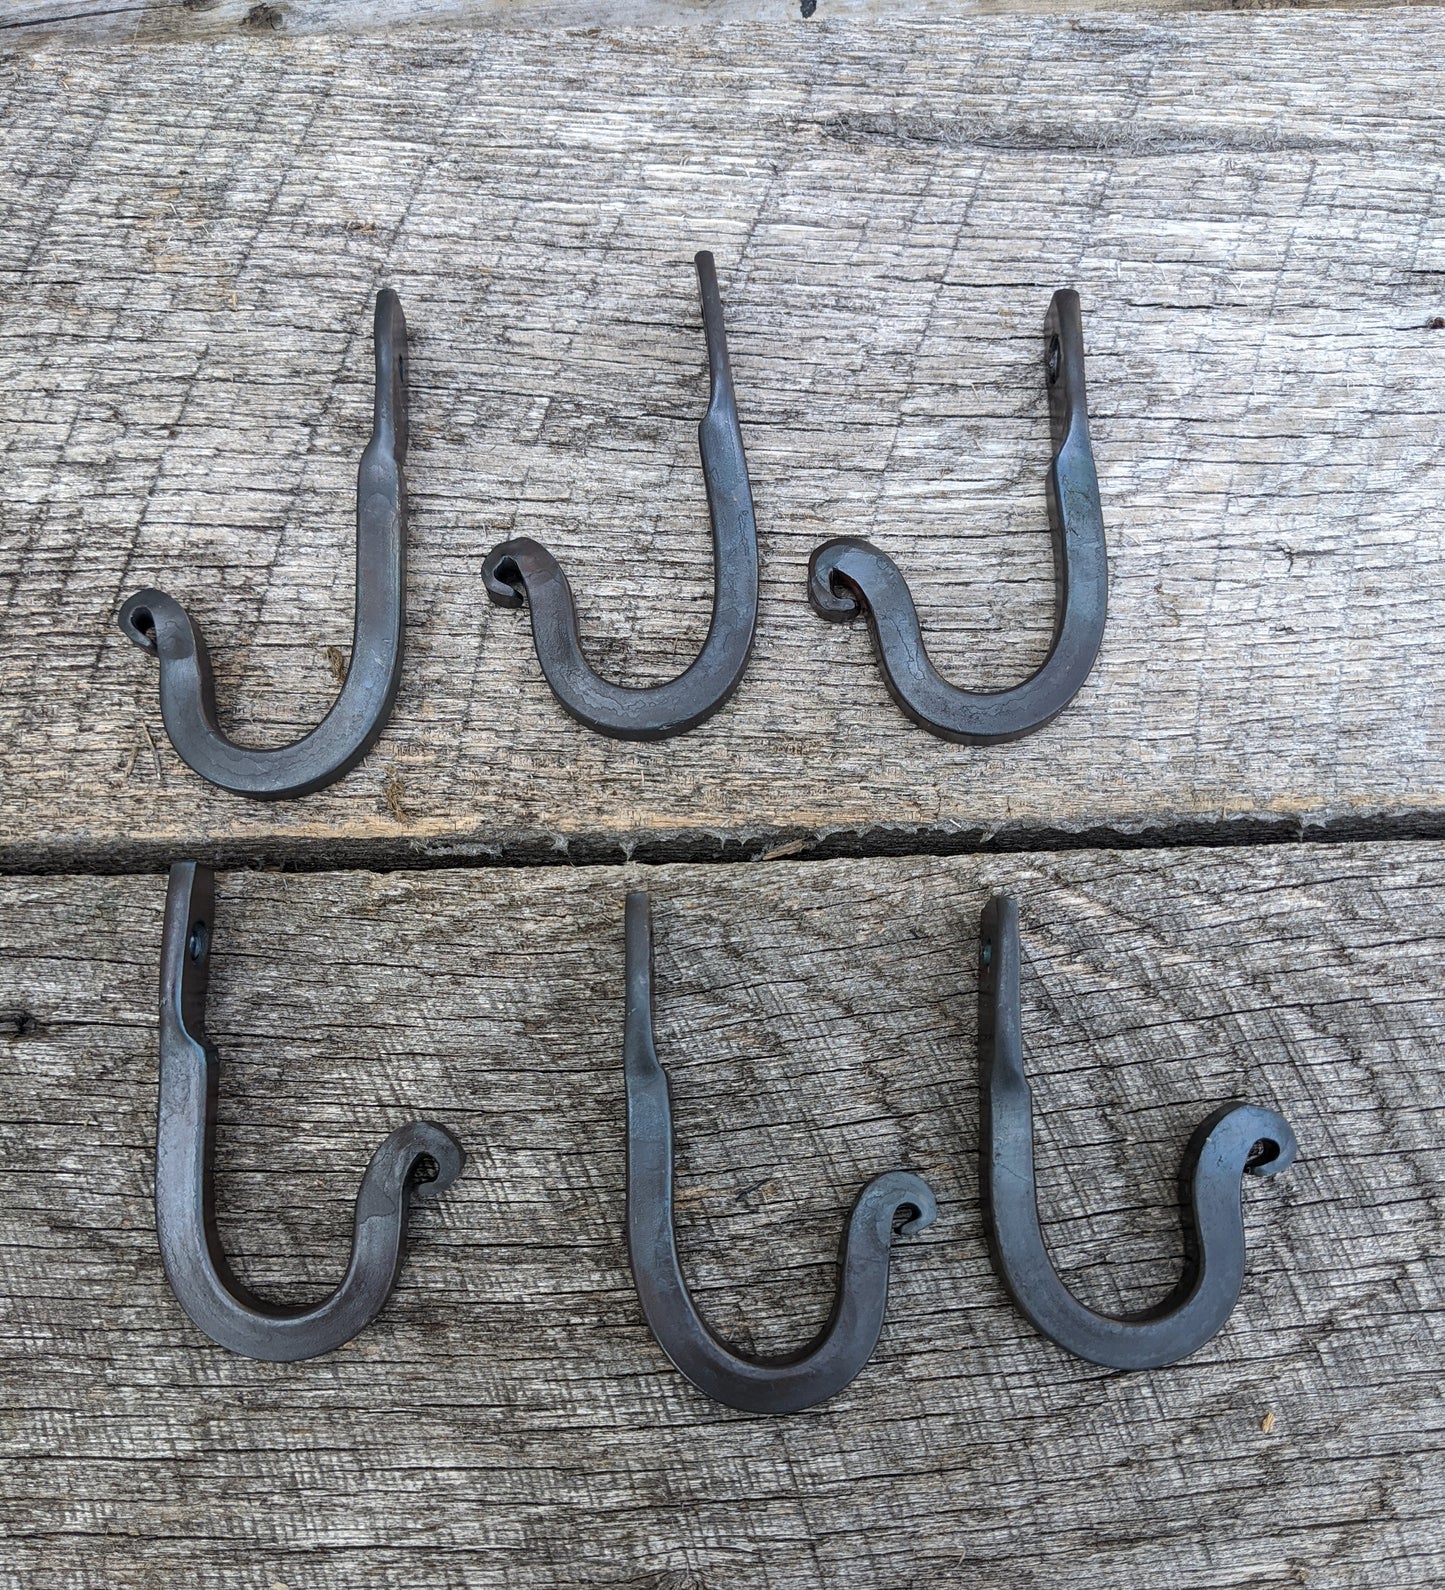 Set of Six Hand Forged Hooks with Scrolled Ends. Vintage/Antique Wrought Iron Look